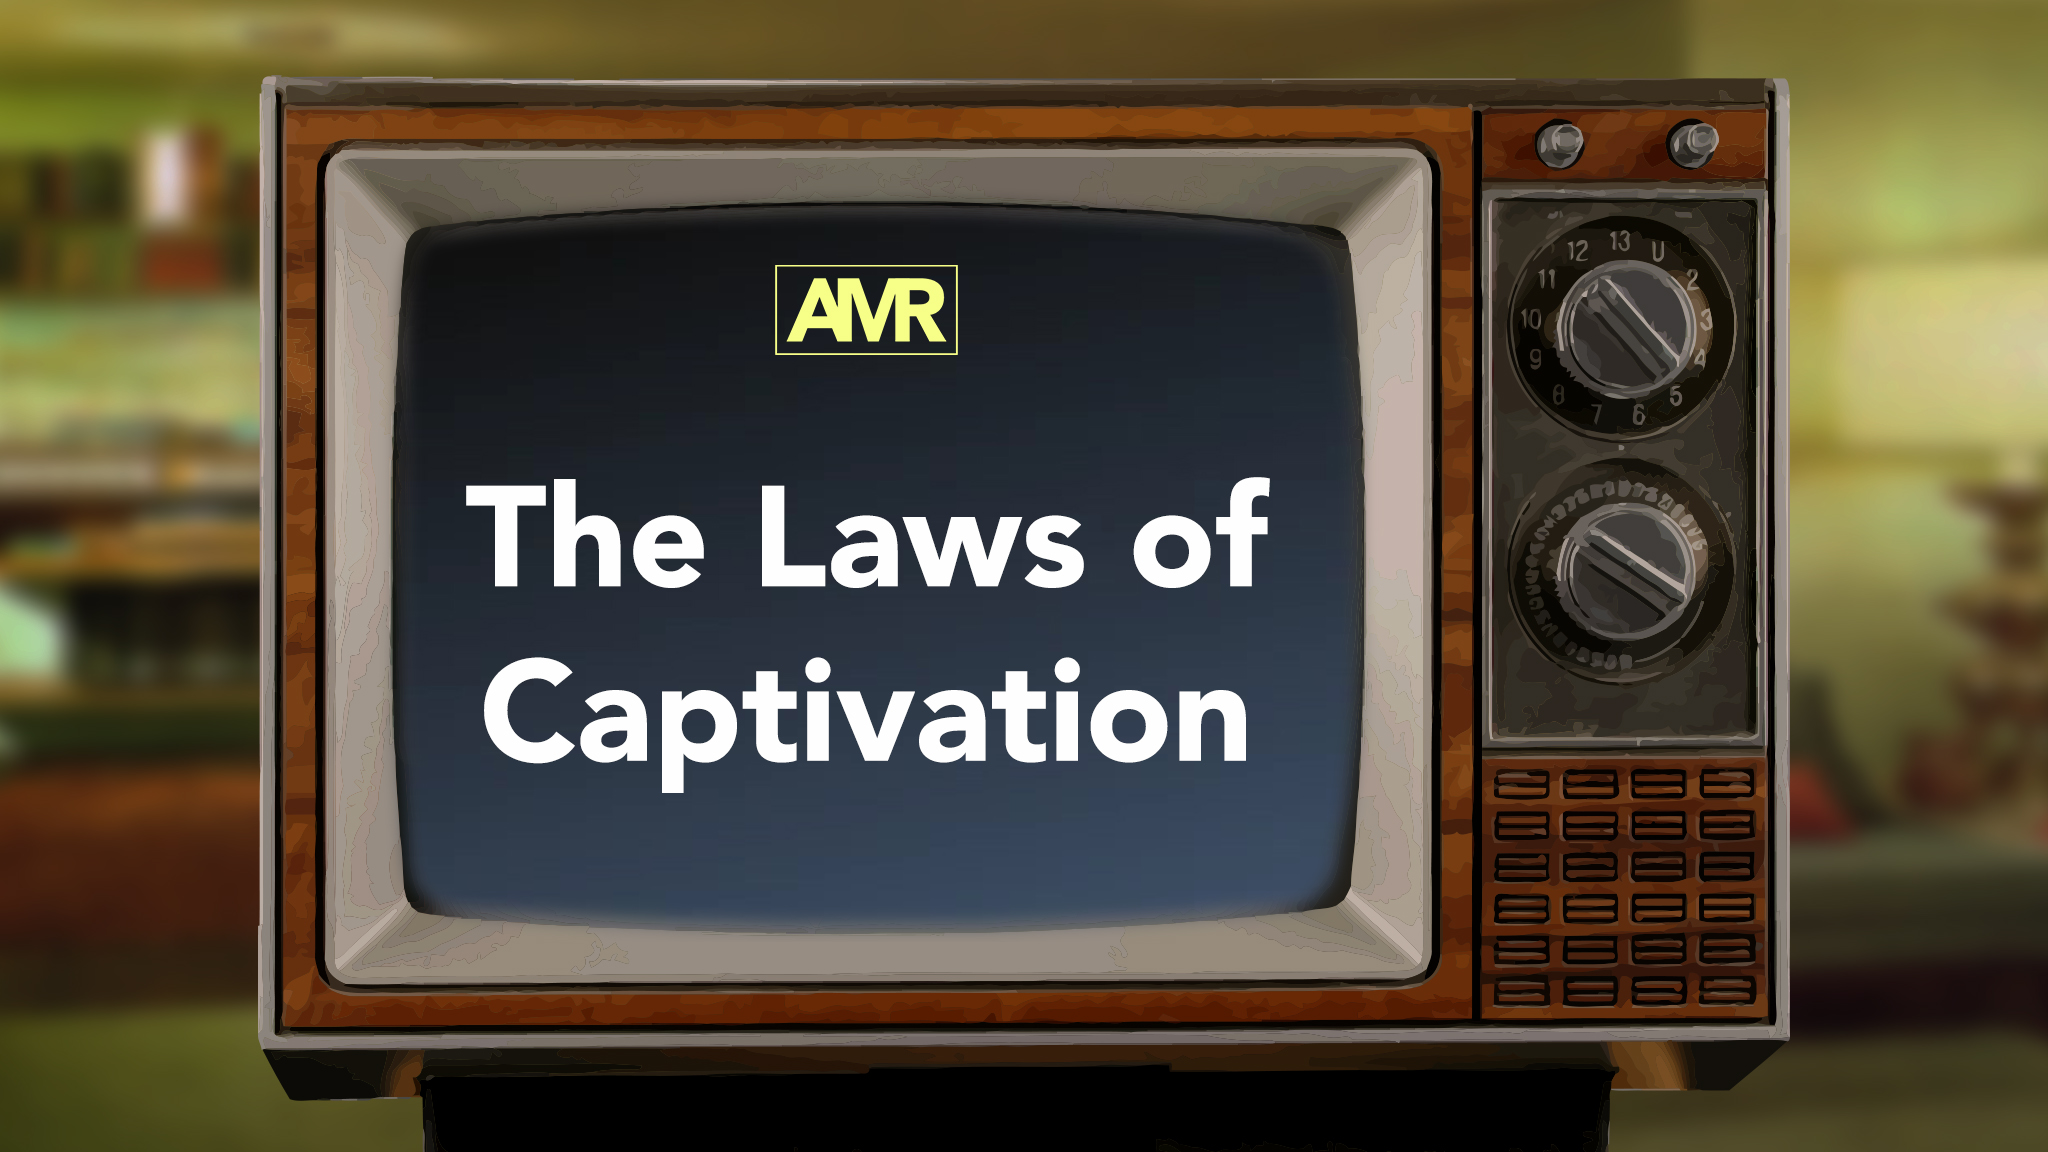 Laws of Captivation cover - retro TV flickering in living room